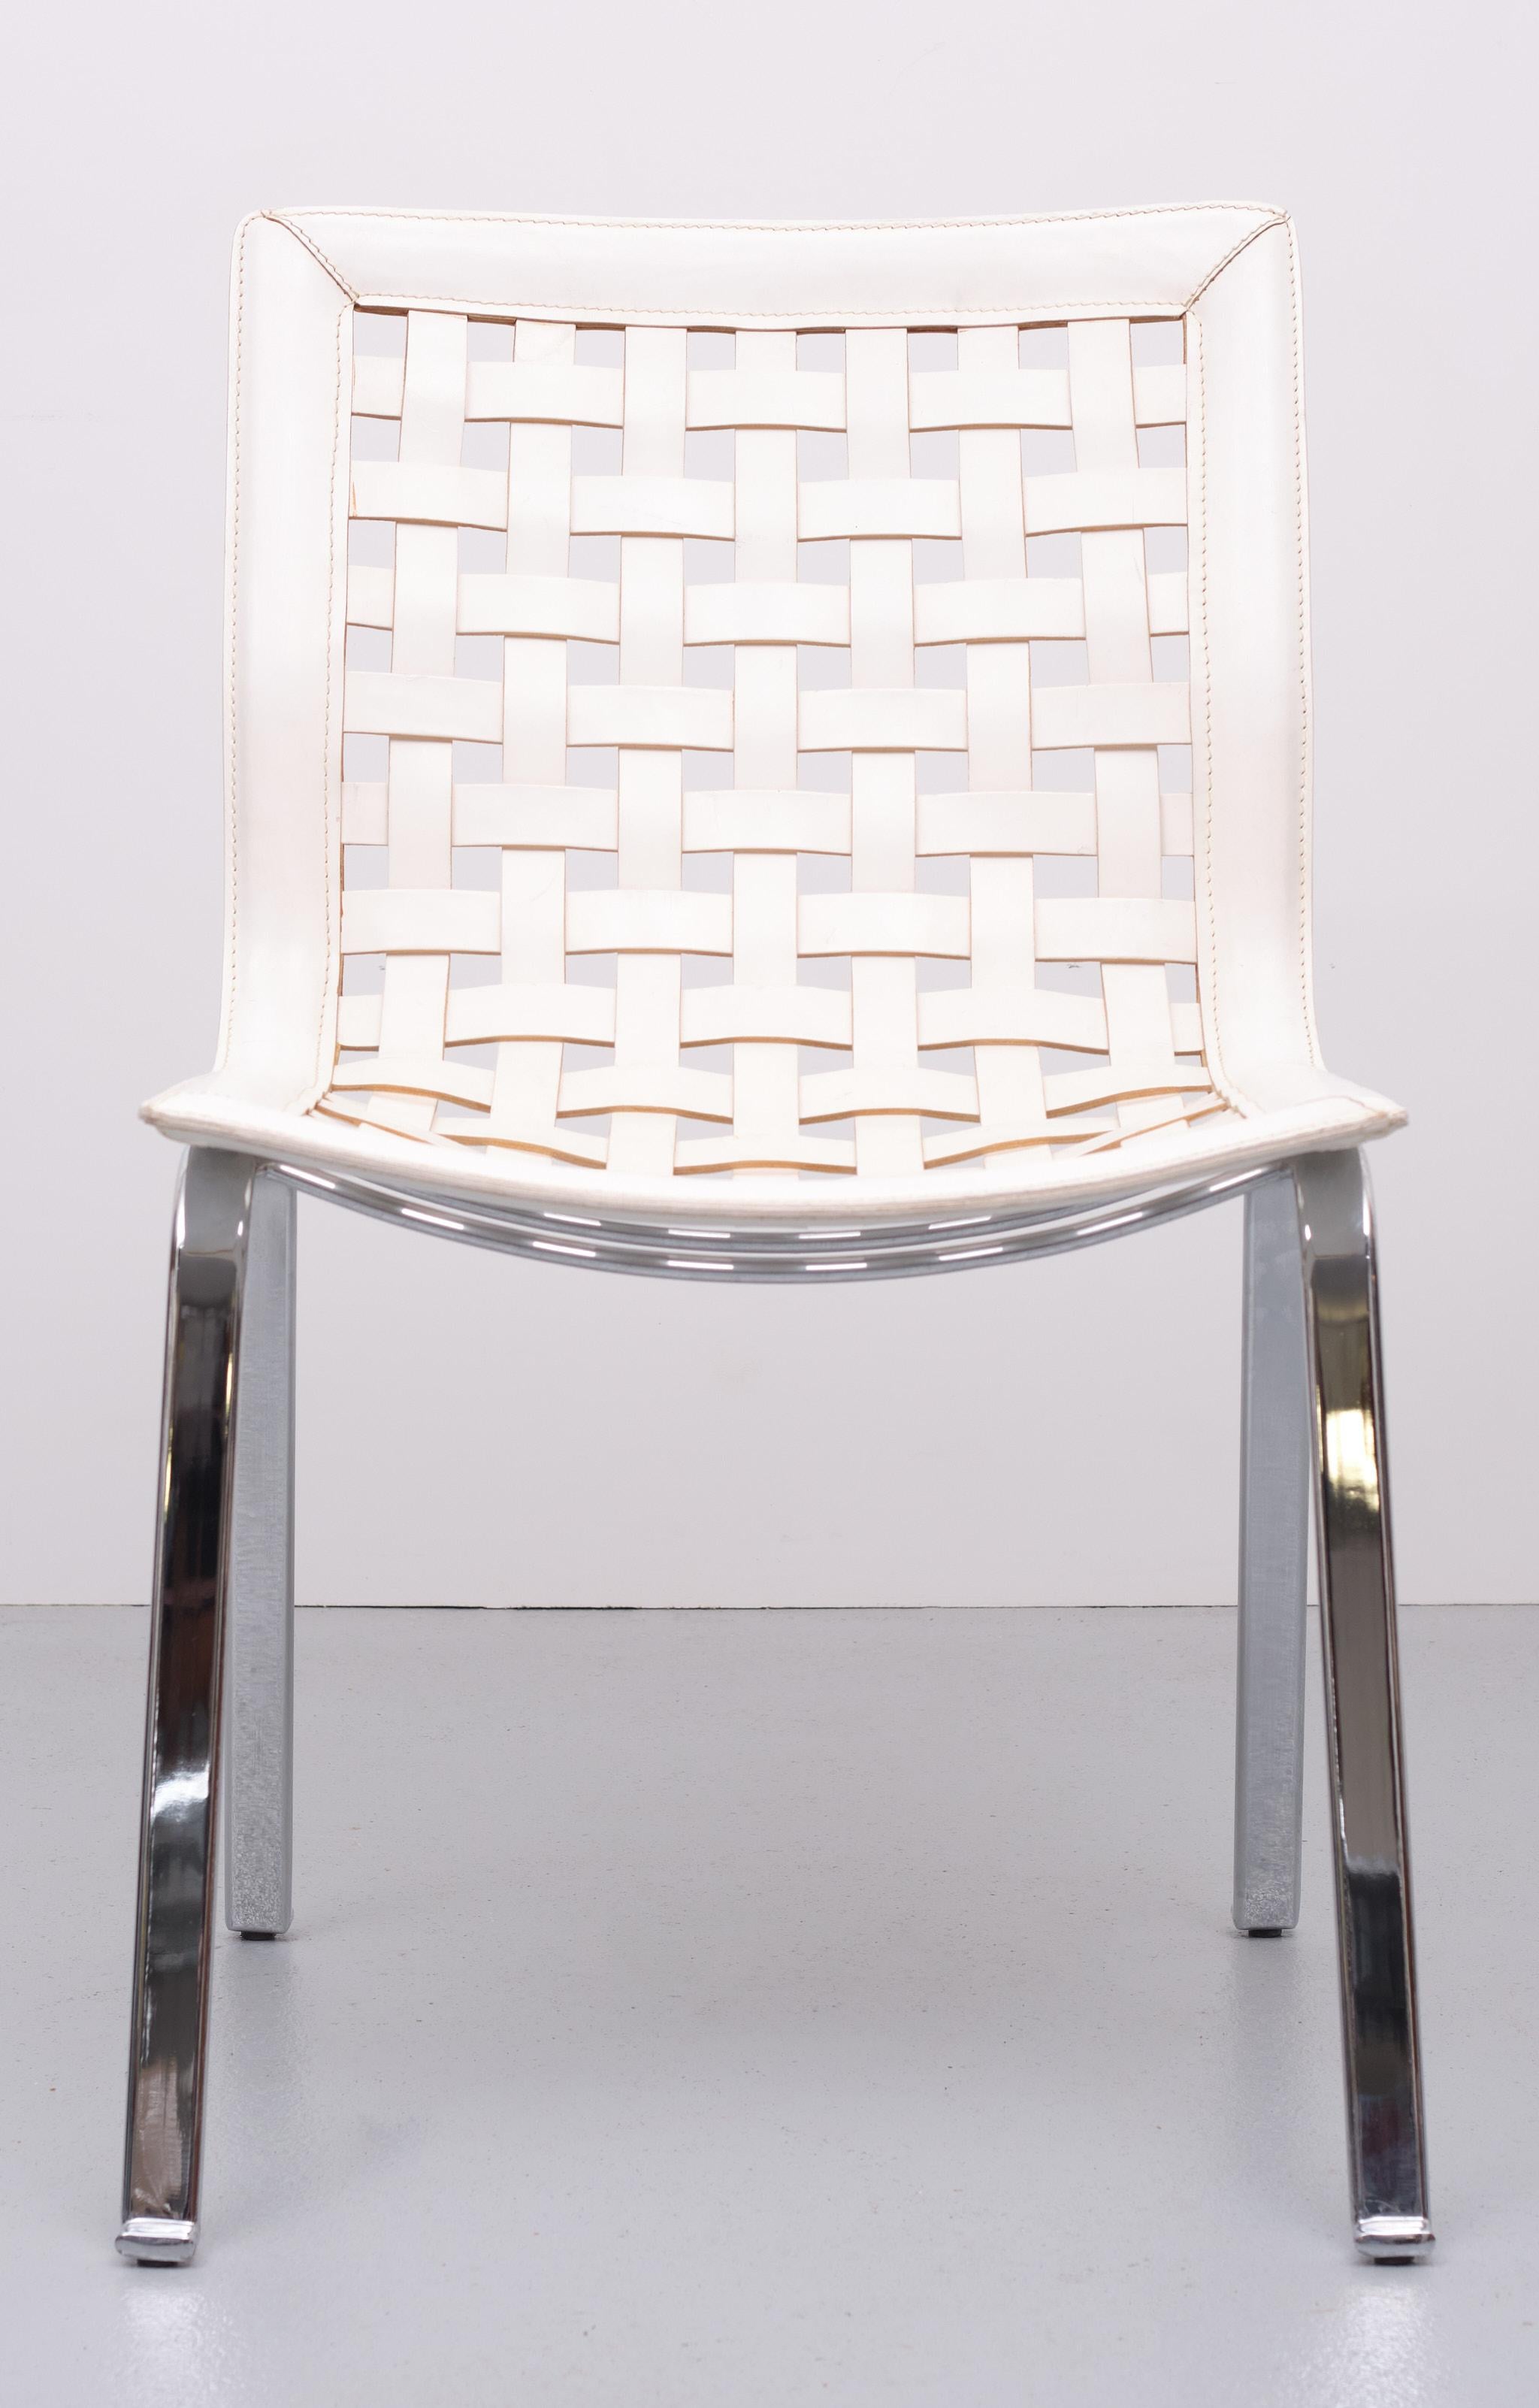 Fasem Leather Net Chair Giancarlo Vegni 1980s  For Sale 2